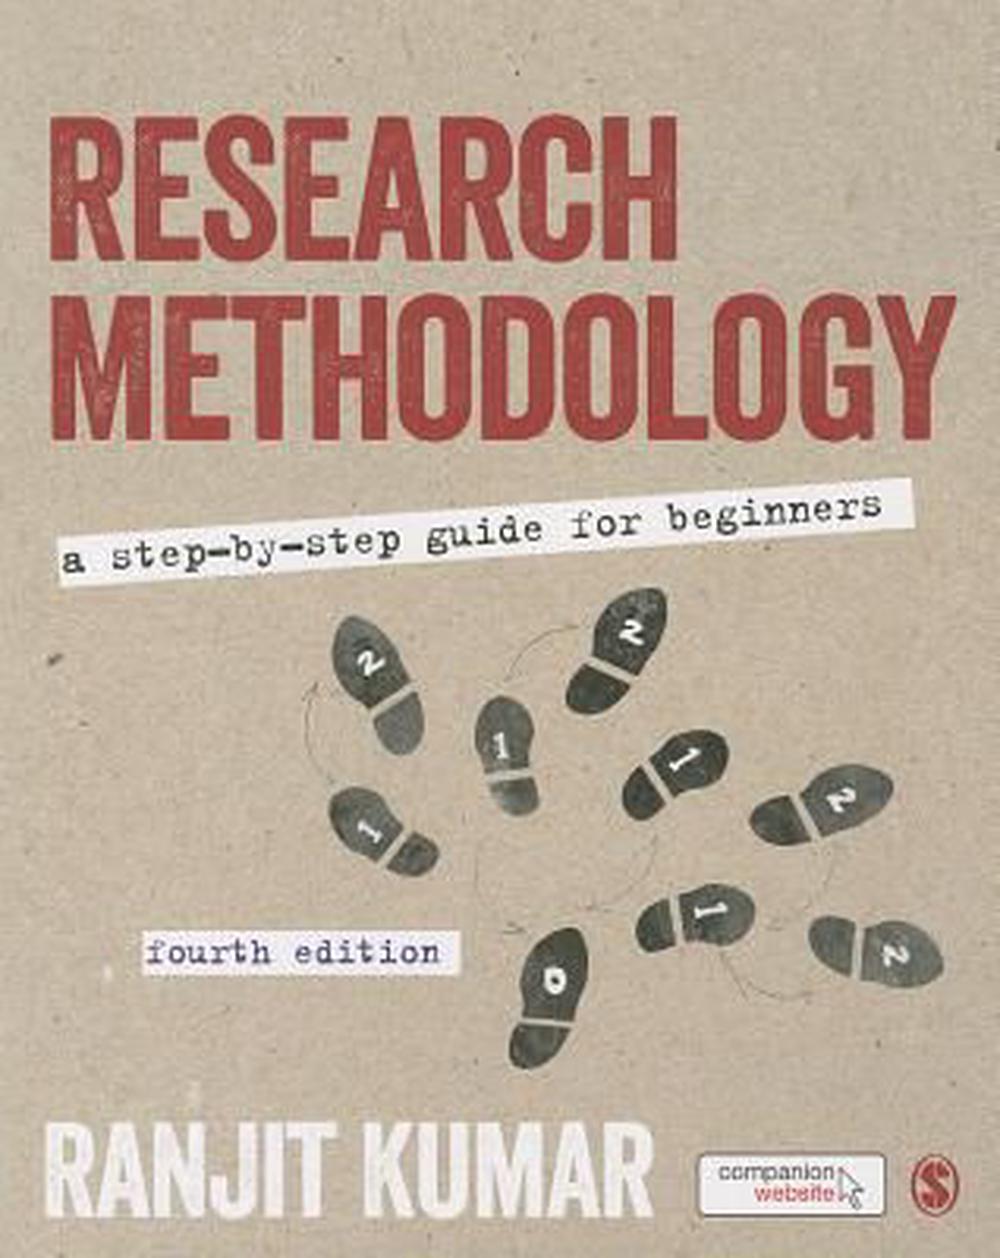 pdf research methodology a step by step guide for beginners